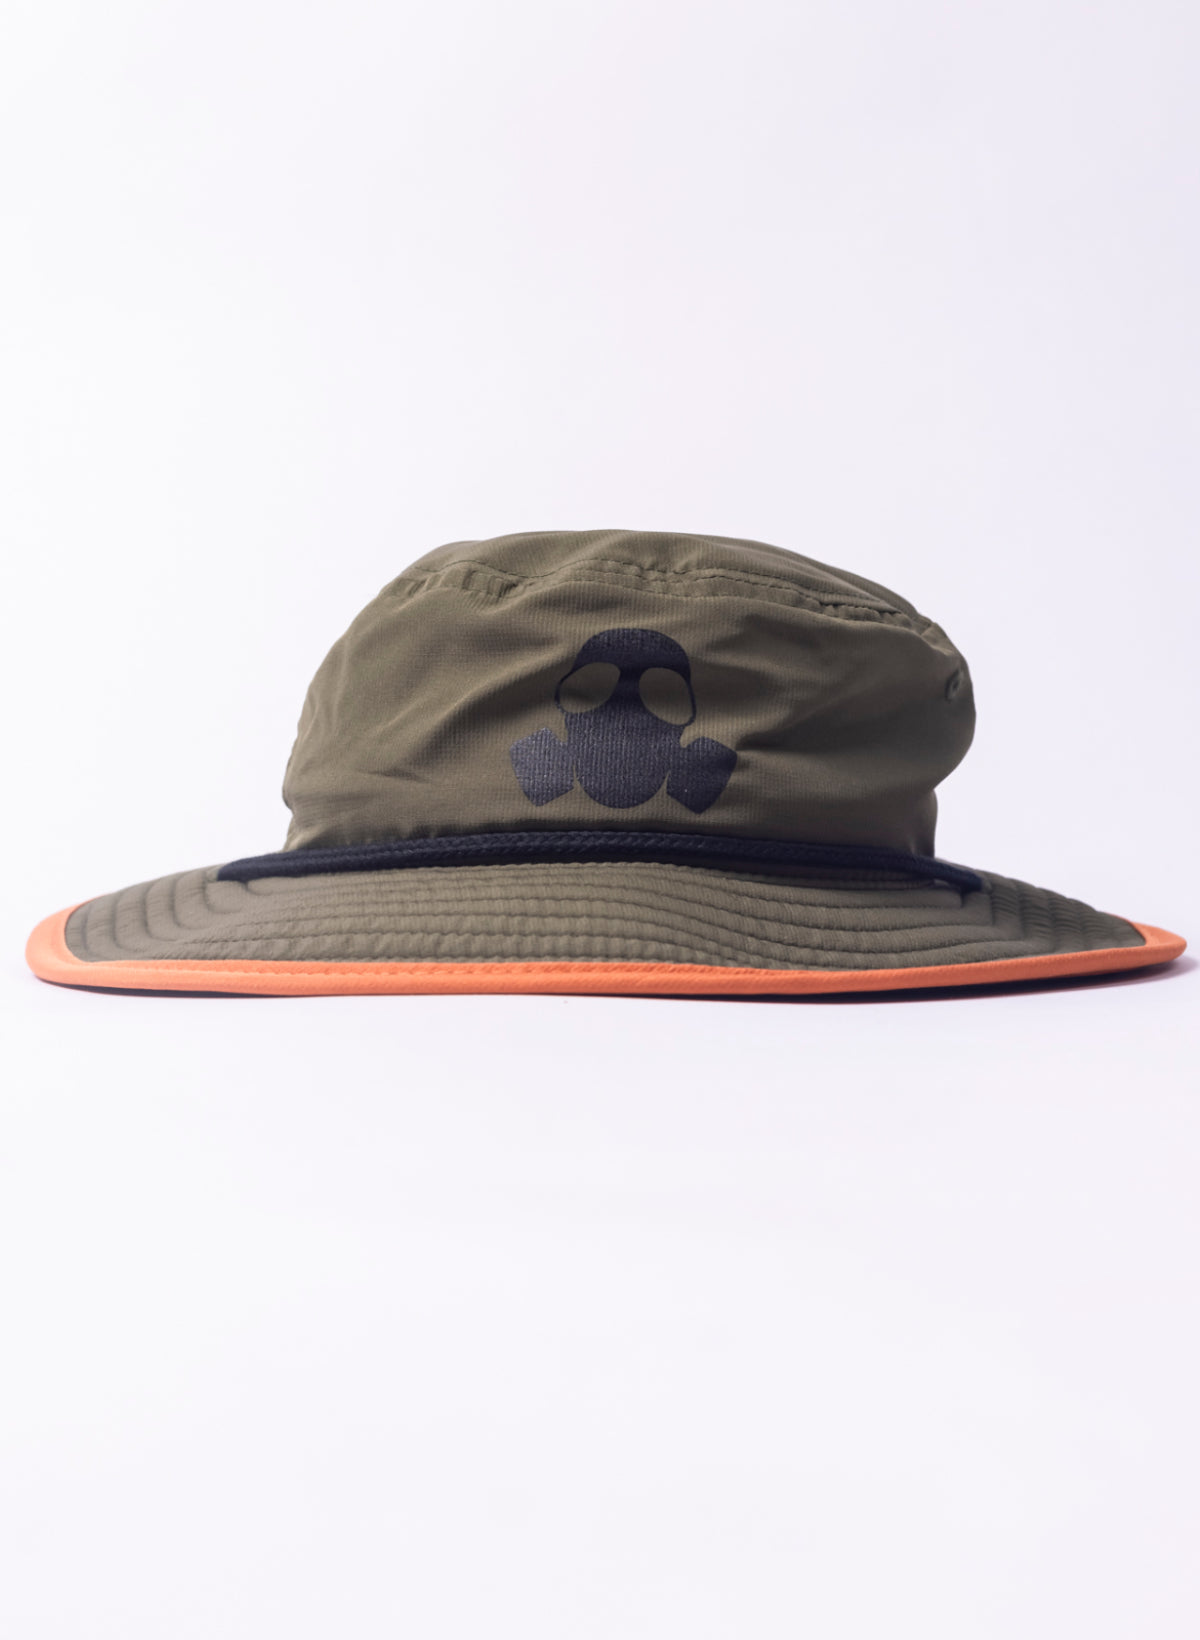 Image of Boonie Hat